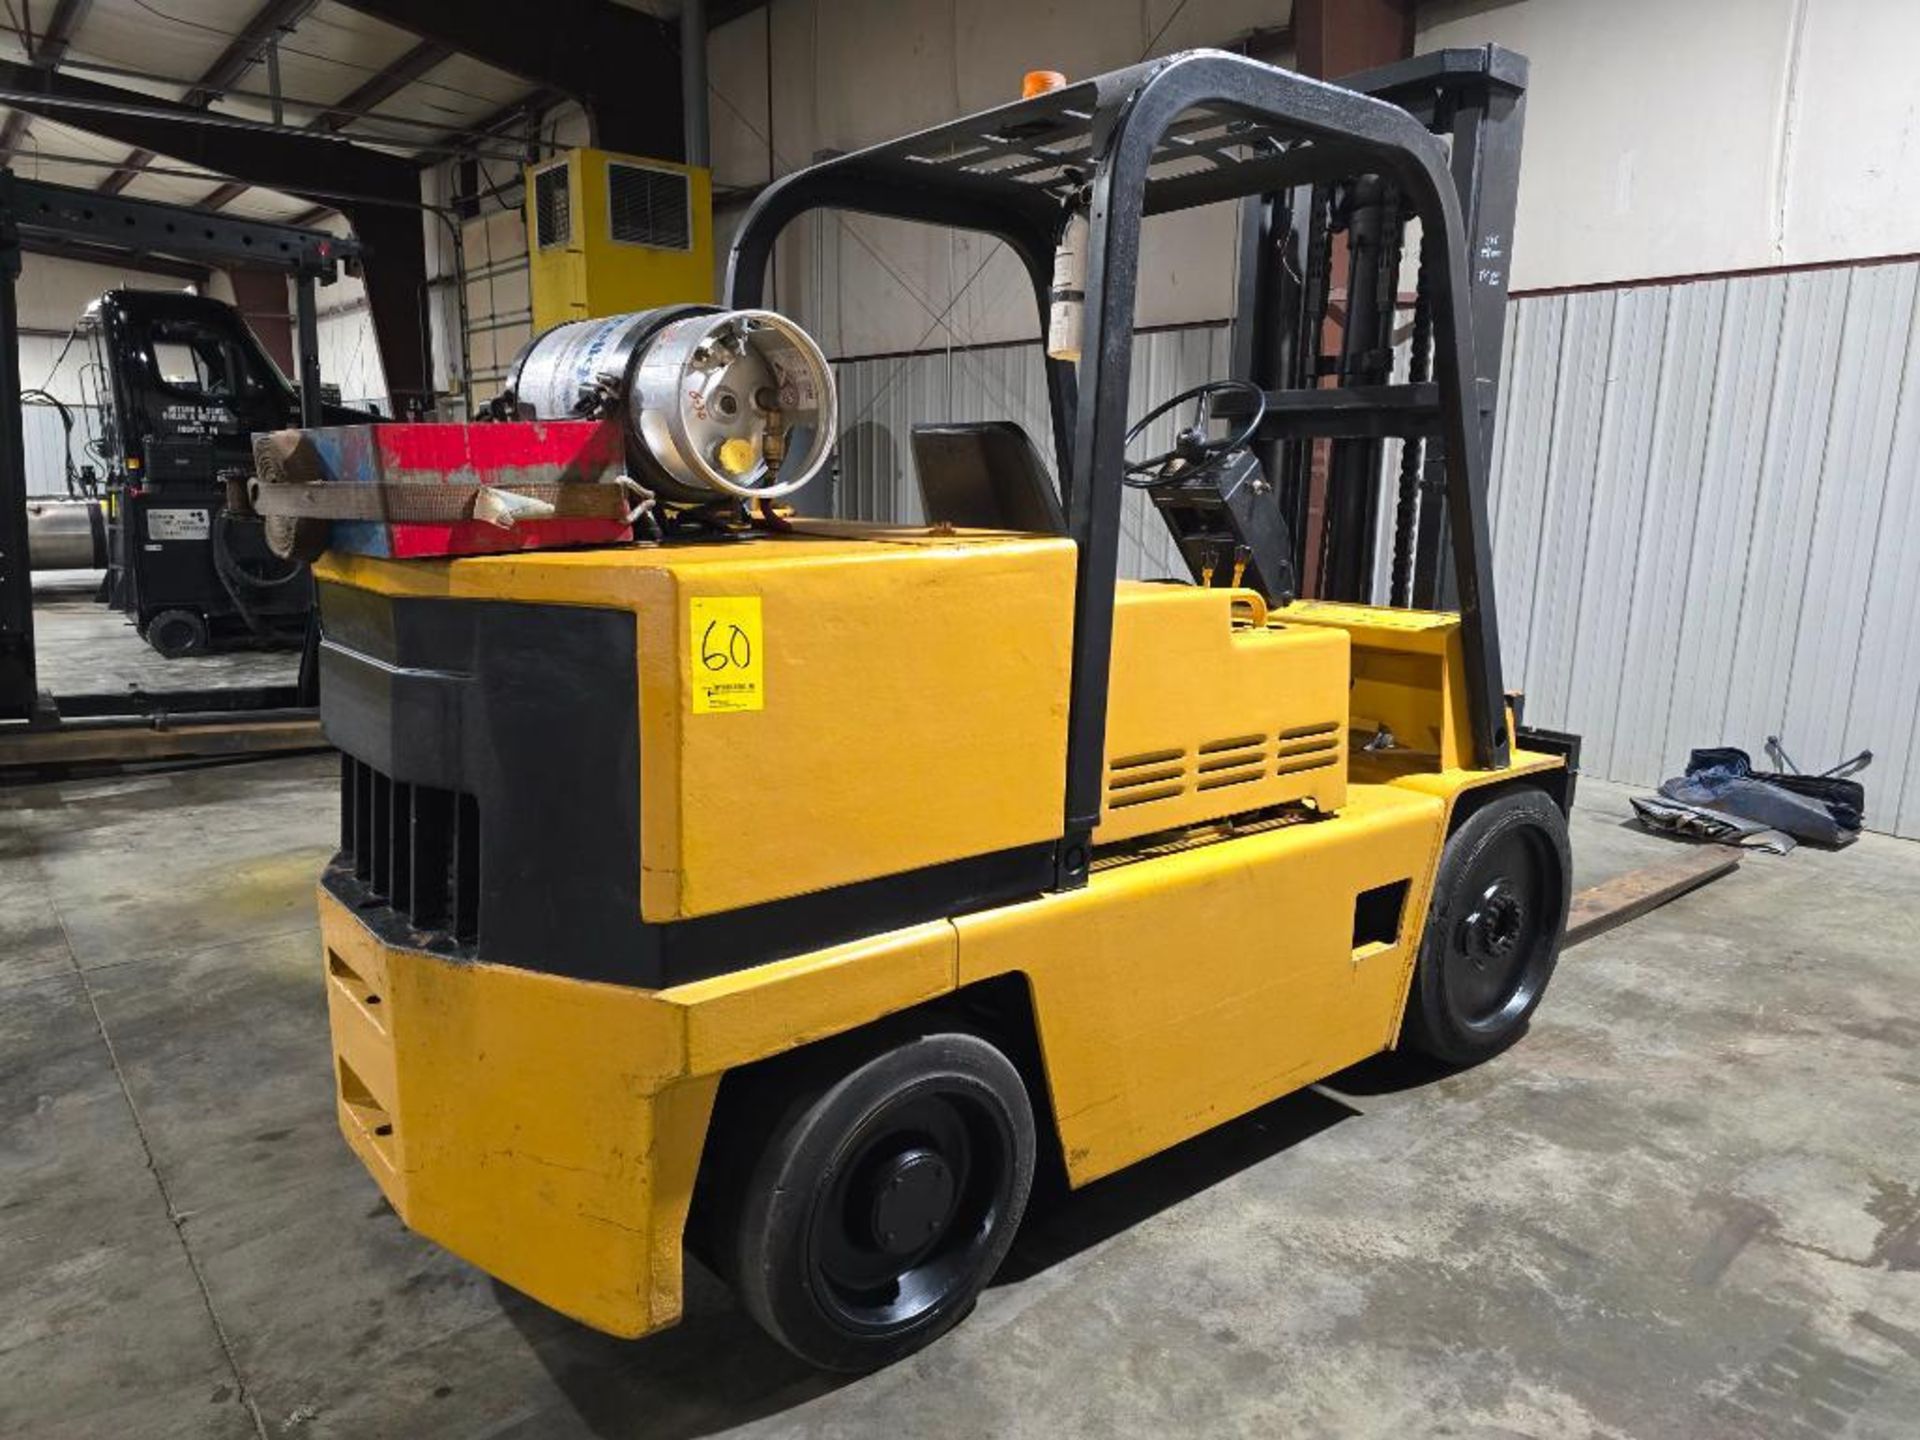 Caterpillar 12,500-LB. Capacity Forklift, Model 125D, LPG, Cushion Tires, 2-Stage, 94-3/4" Lowered, - Image 8 of 11